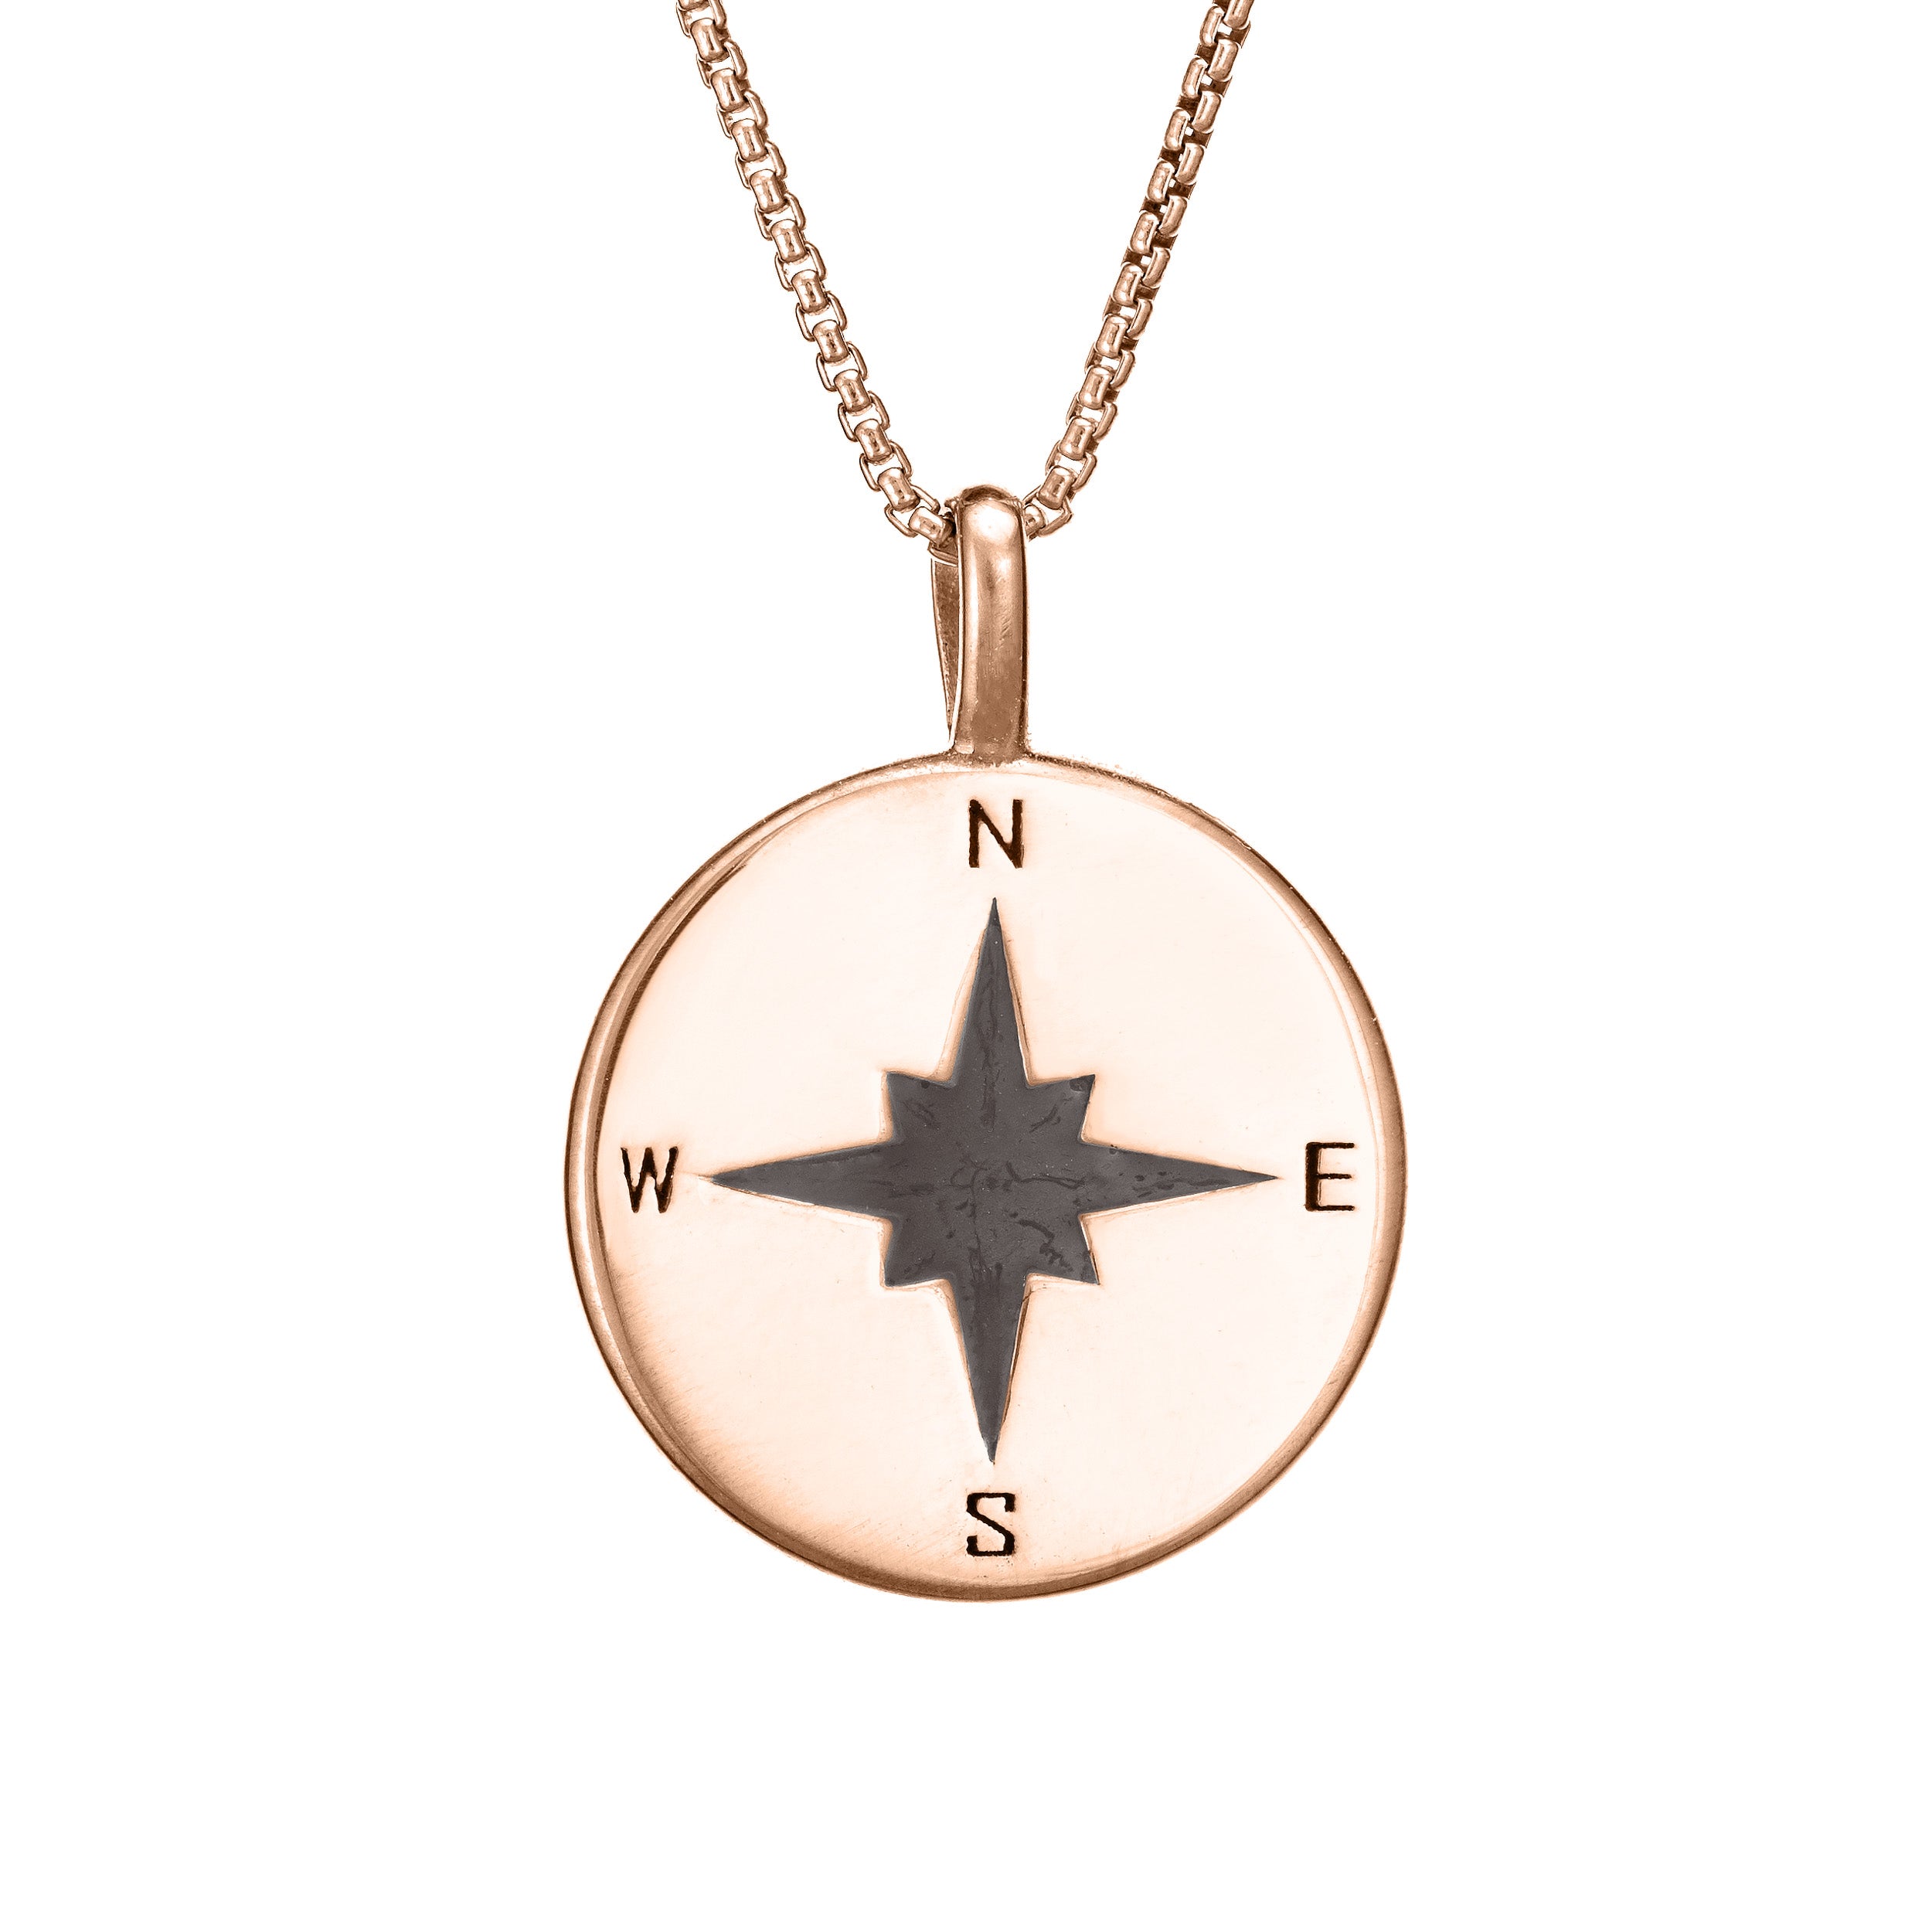 Engraved Compass Necklace With Semi-Precious Stone in 18K Gold Plating -  MYKA